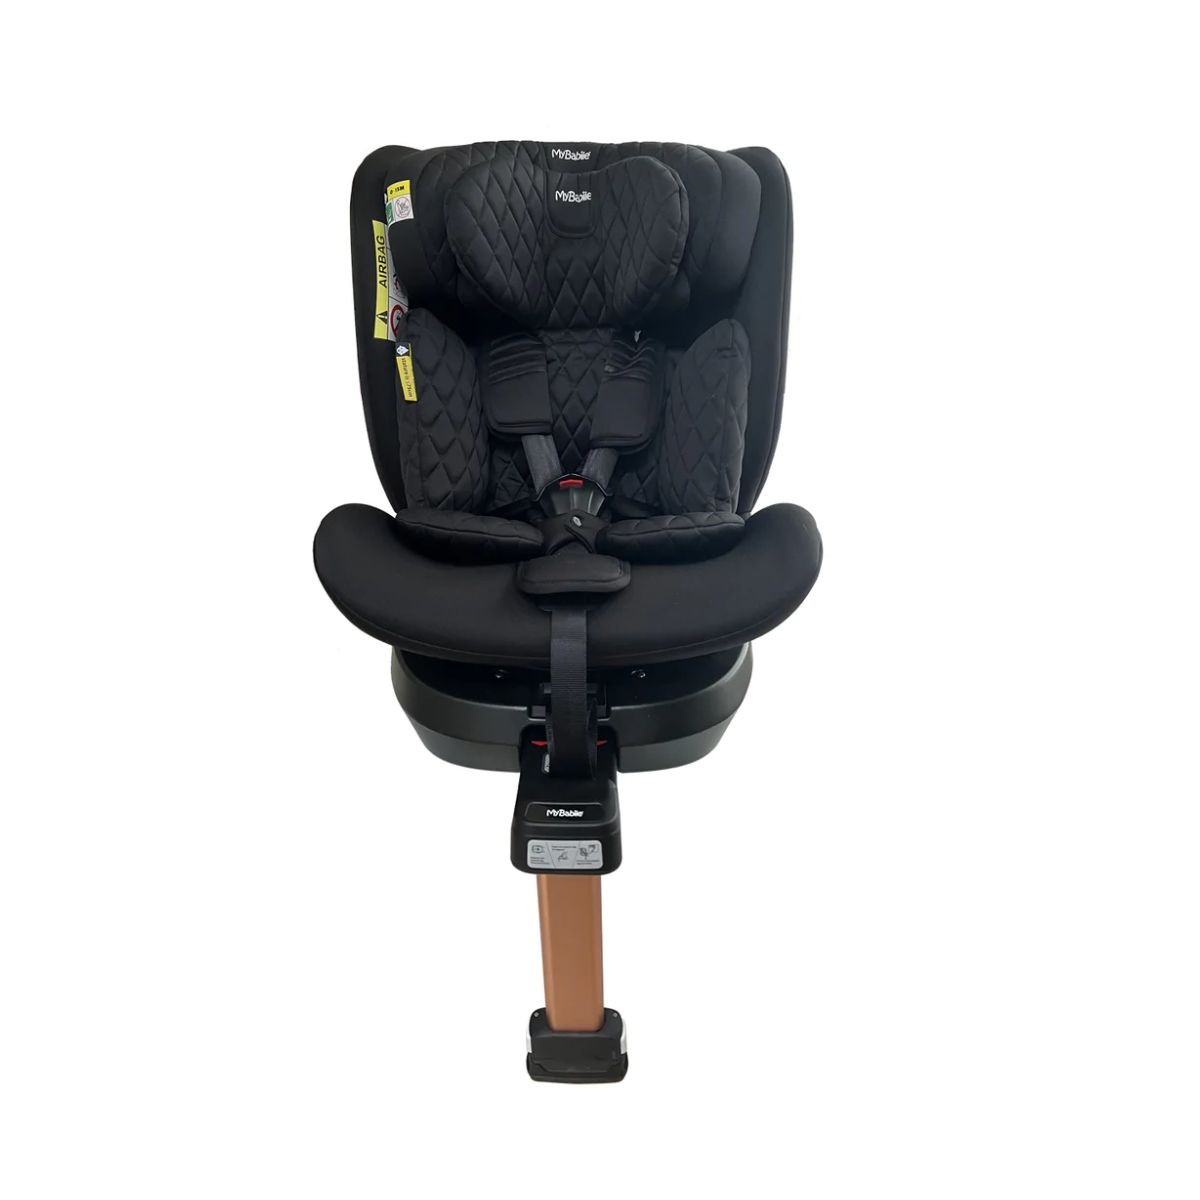 My Babiie Billie Faiers Spin Group 0+/1/2/3 iSize Isofix Car Seat